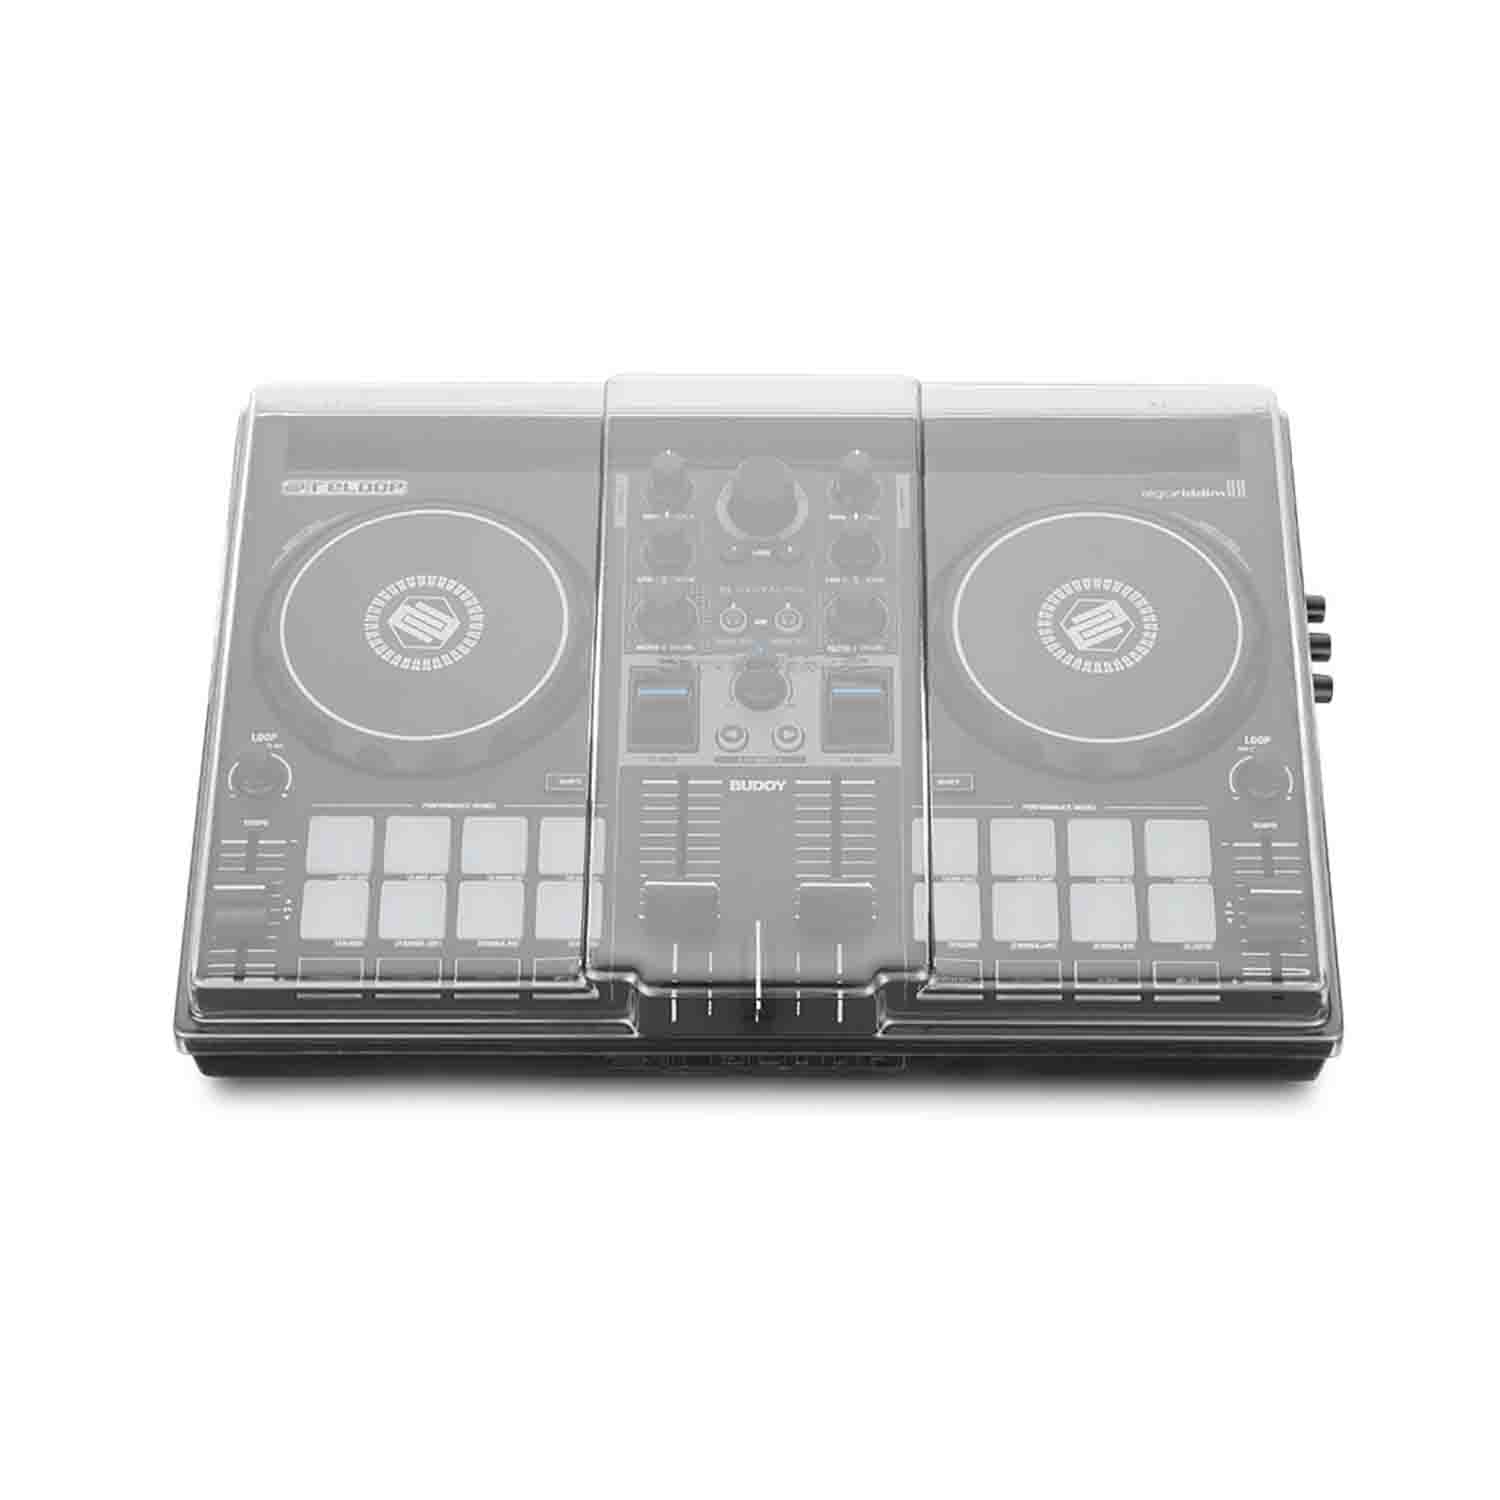 Decksaver DSLE-PC-READY Protection Cover for LE Reloop READY and BUDDY DJ Controller - Light Edition - Hollywood DJ